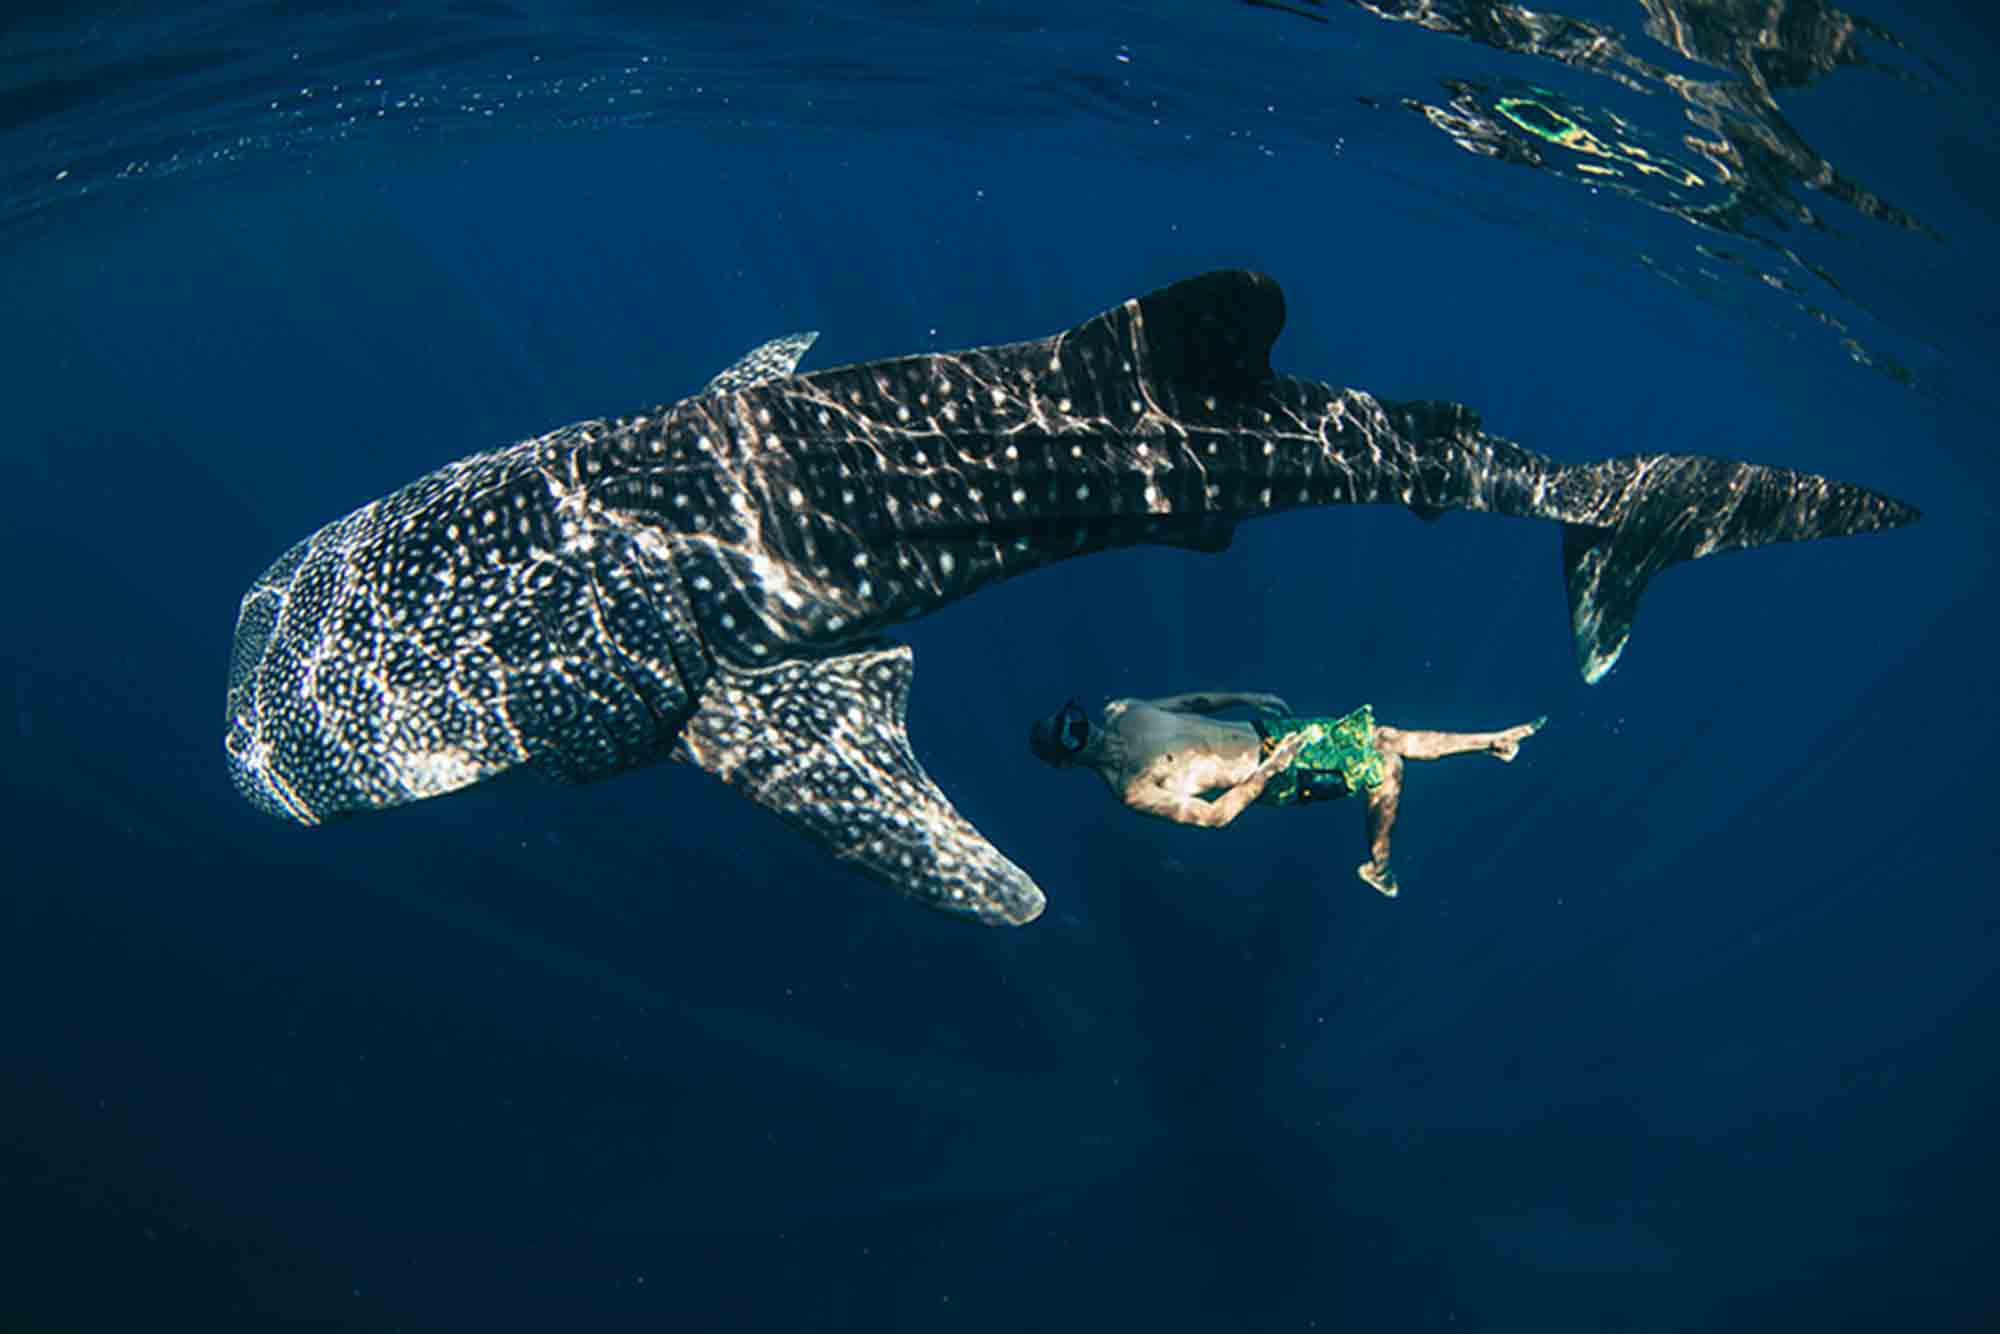 A whale shark in Oslob in the Philippines near Dumaguete with a snorkeler swimming below